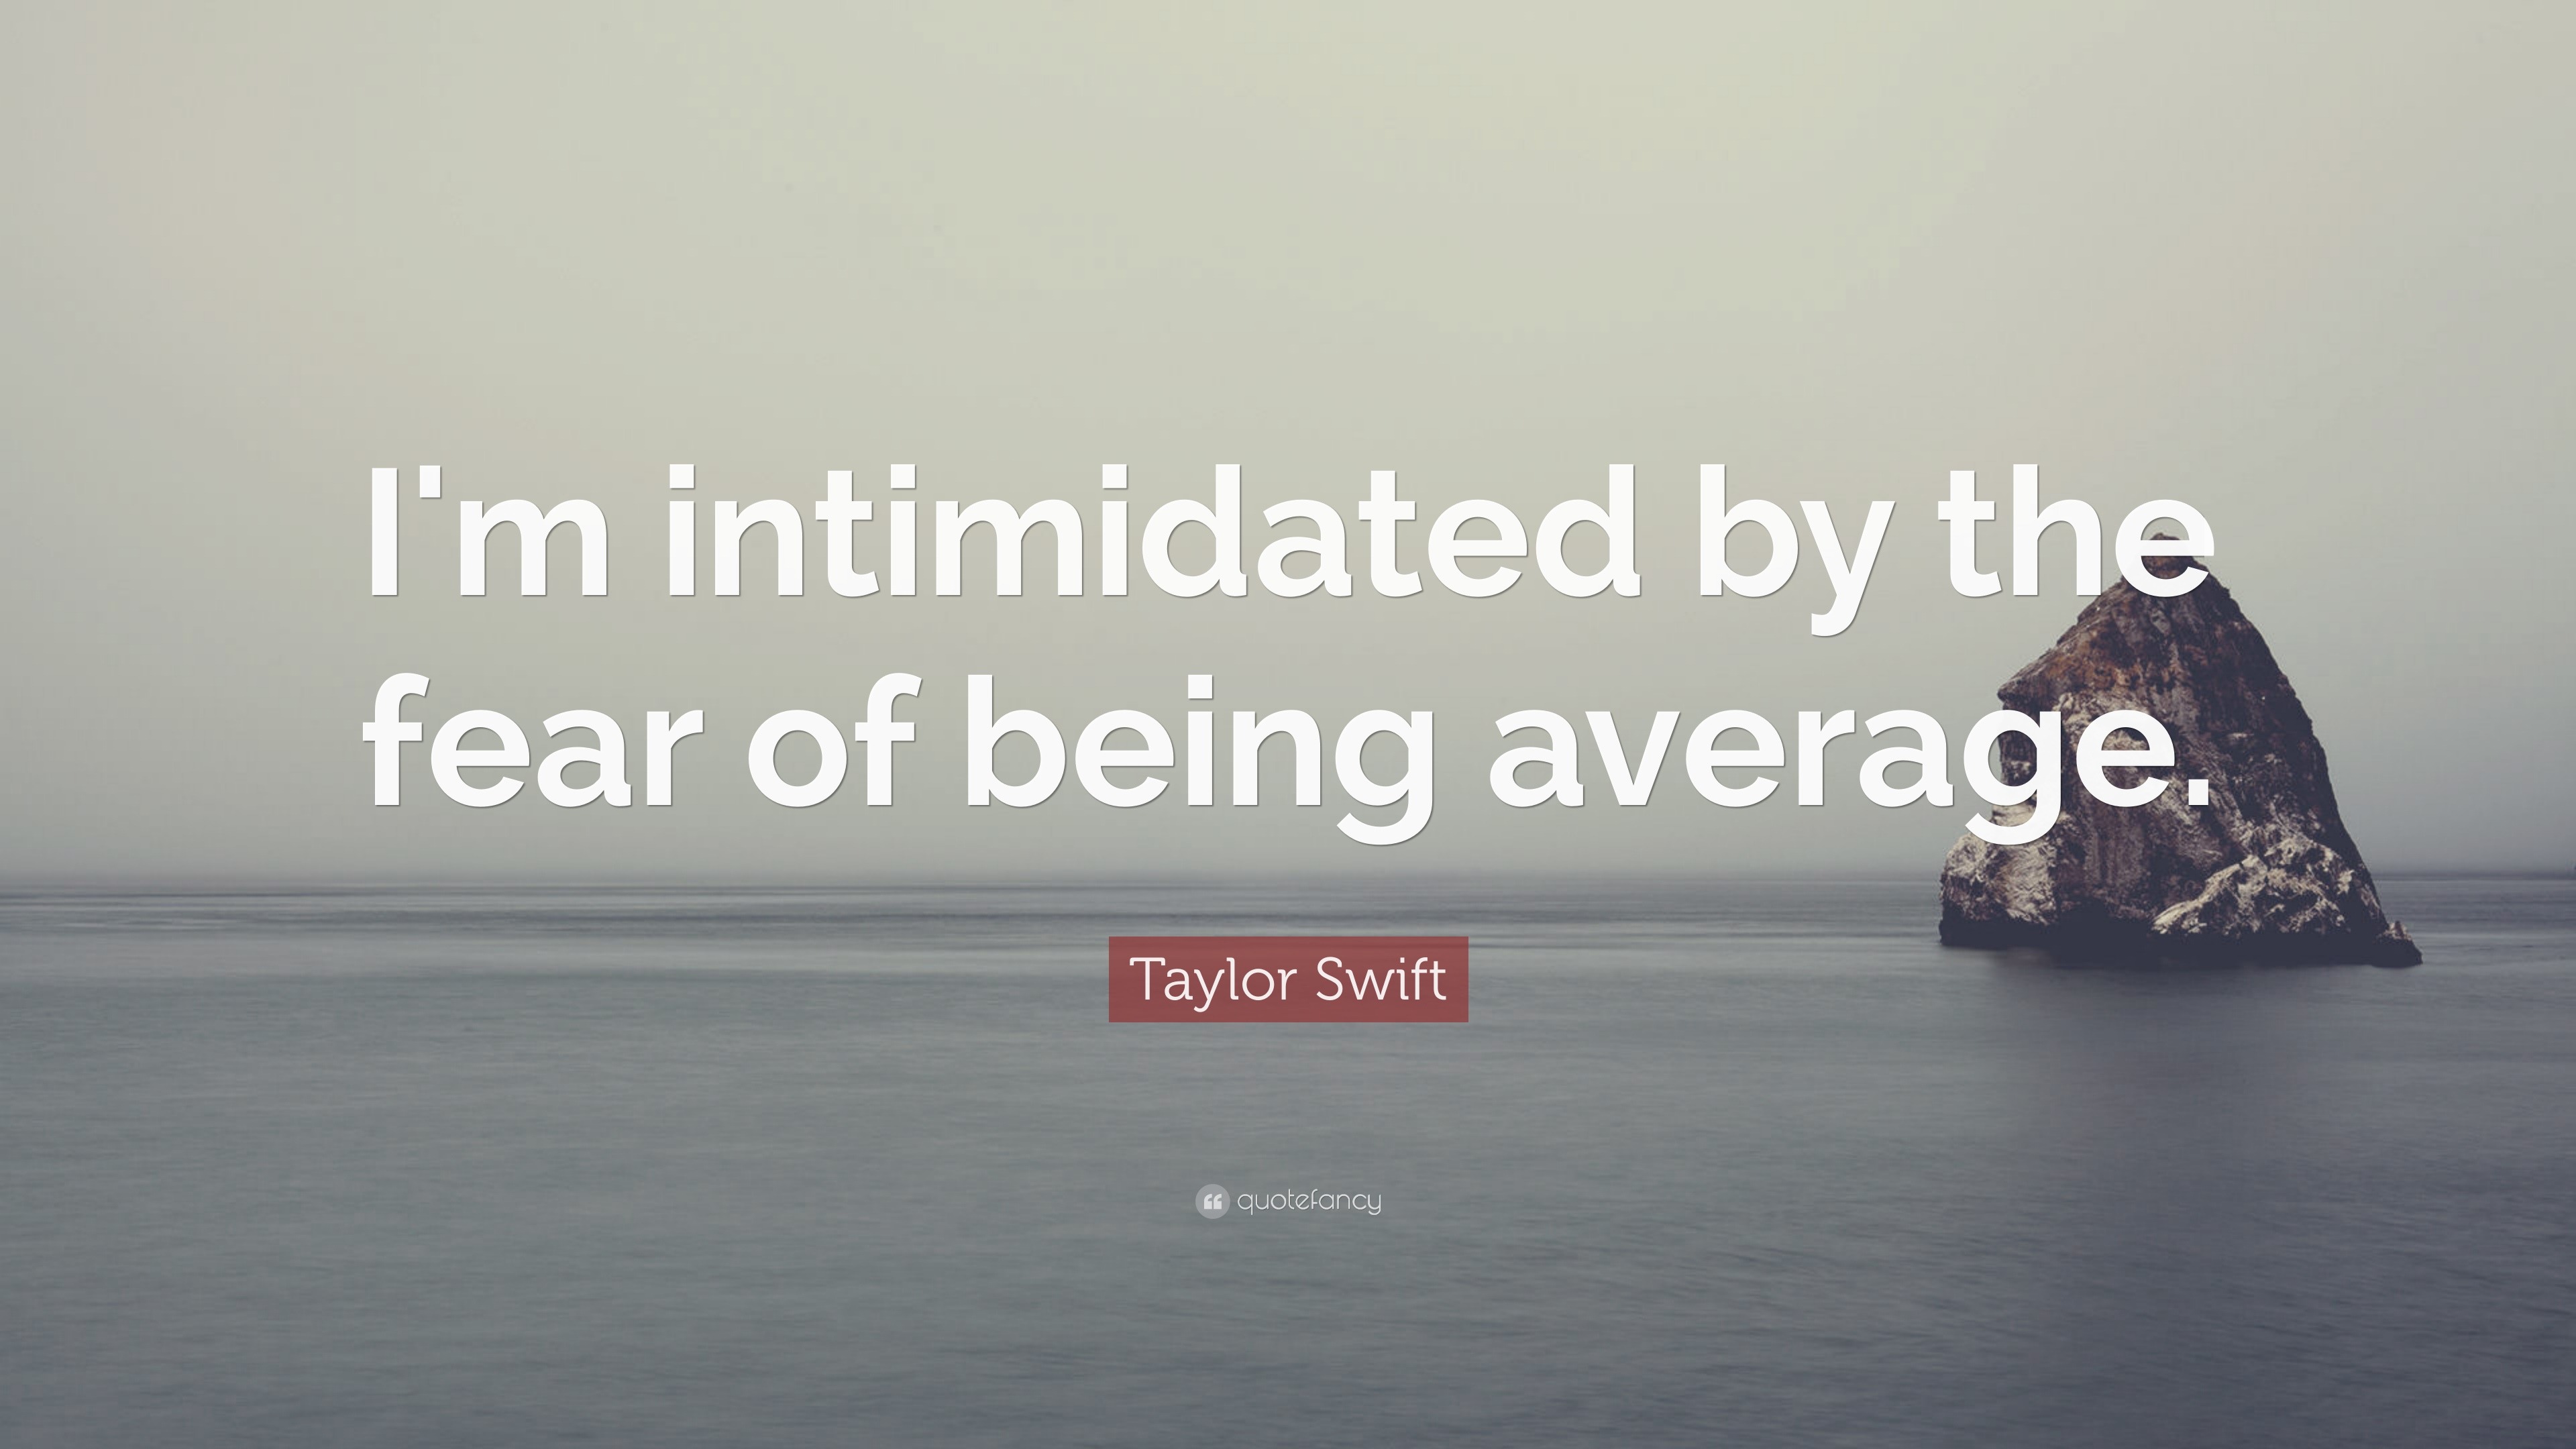 Taylor Swift Quote “I'm intimidated by the fear of being average.”